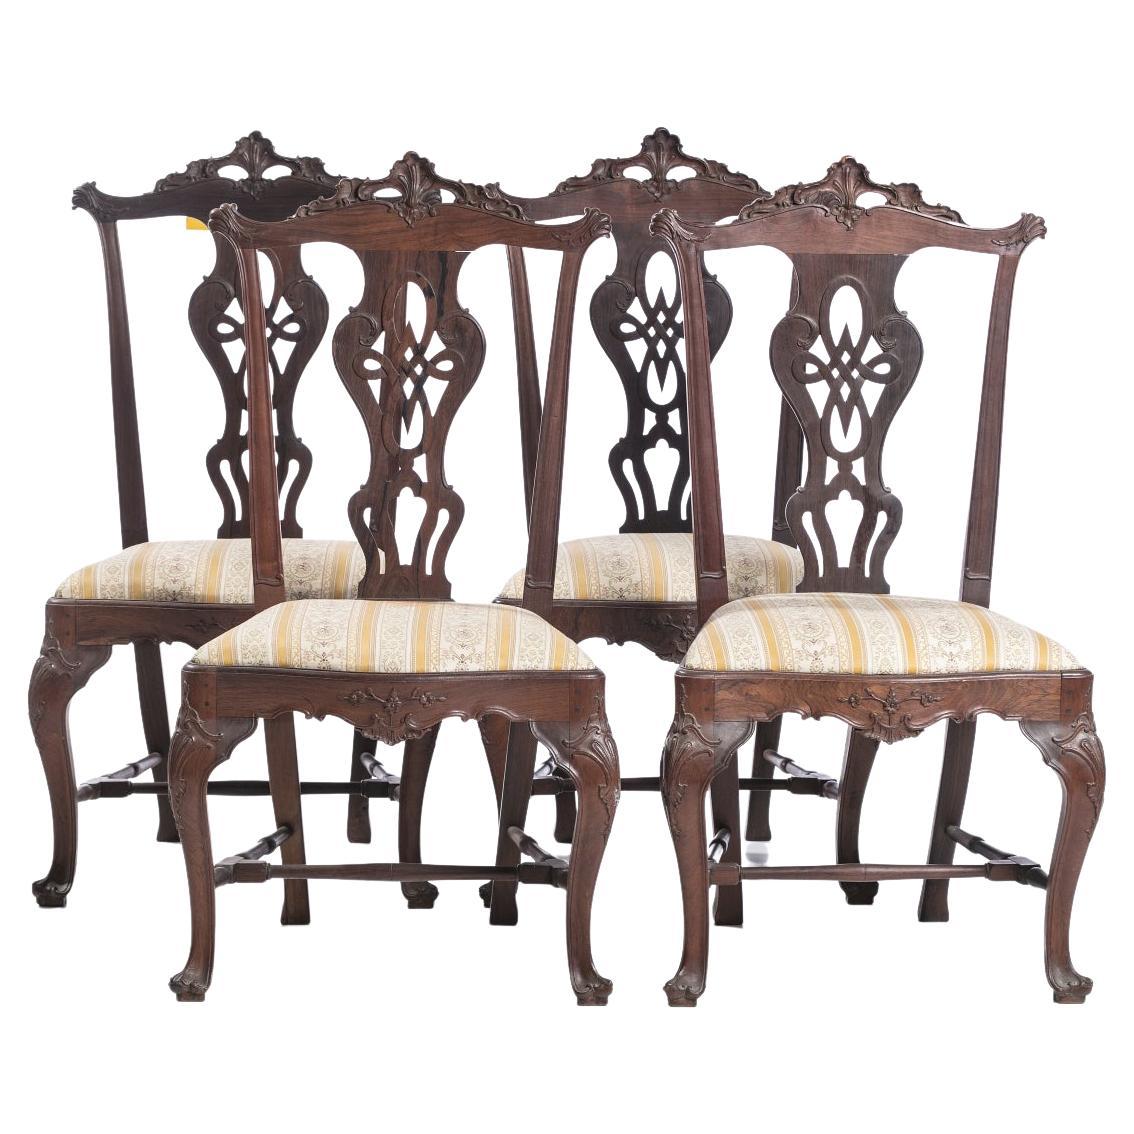 Important Set of 4 Portuguese Chairs from the 18th Century